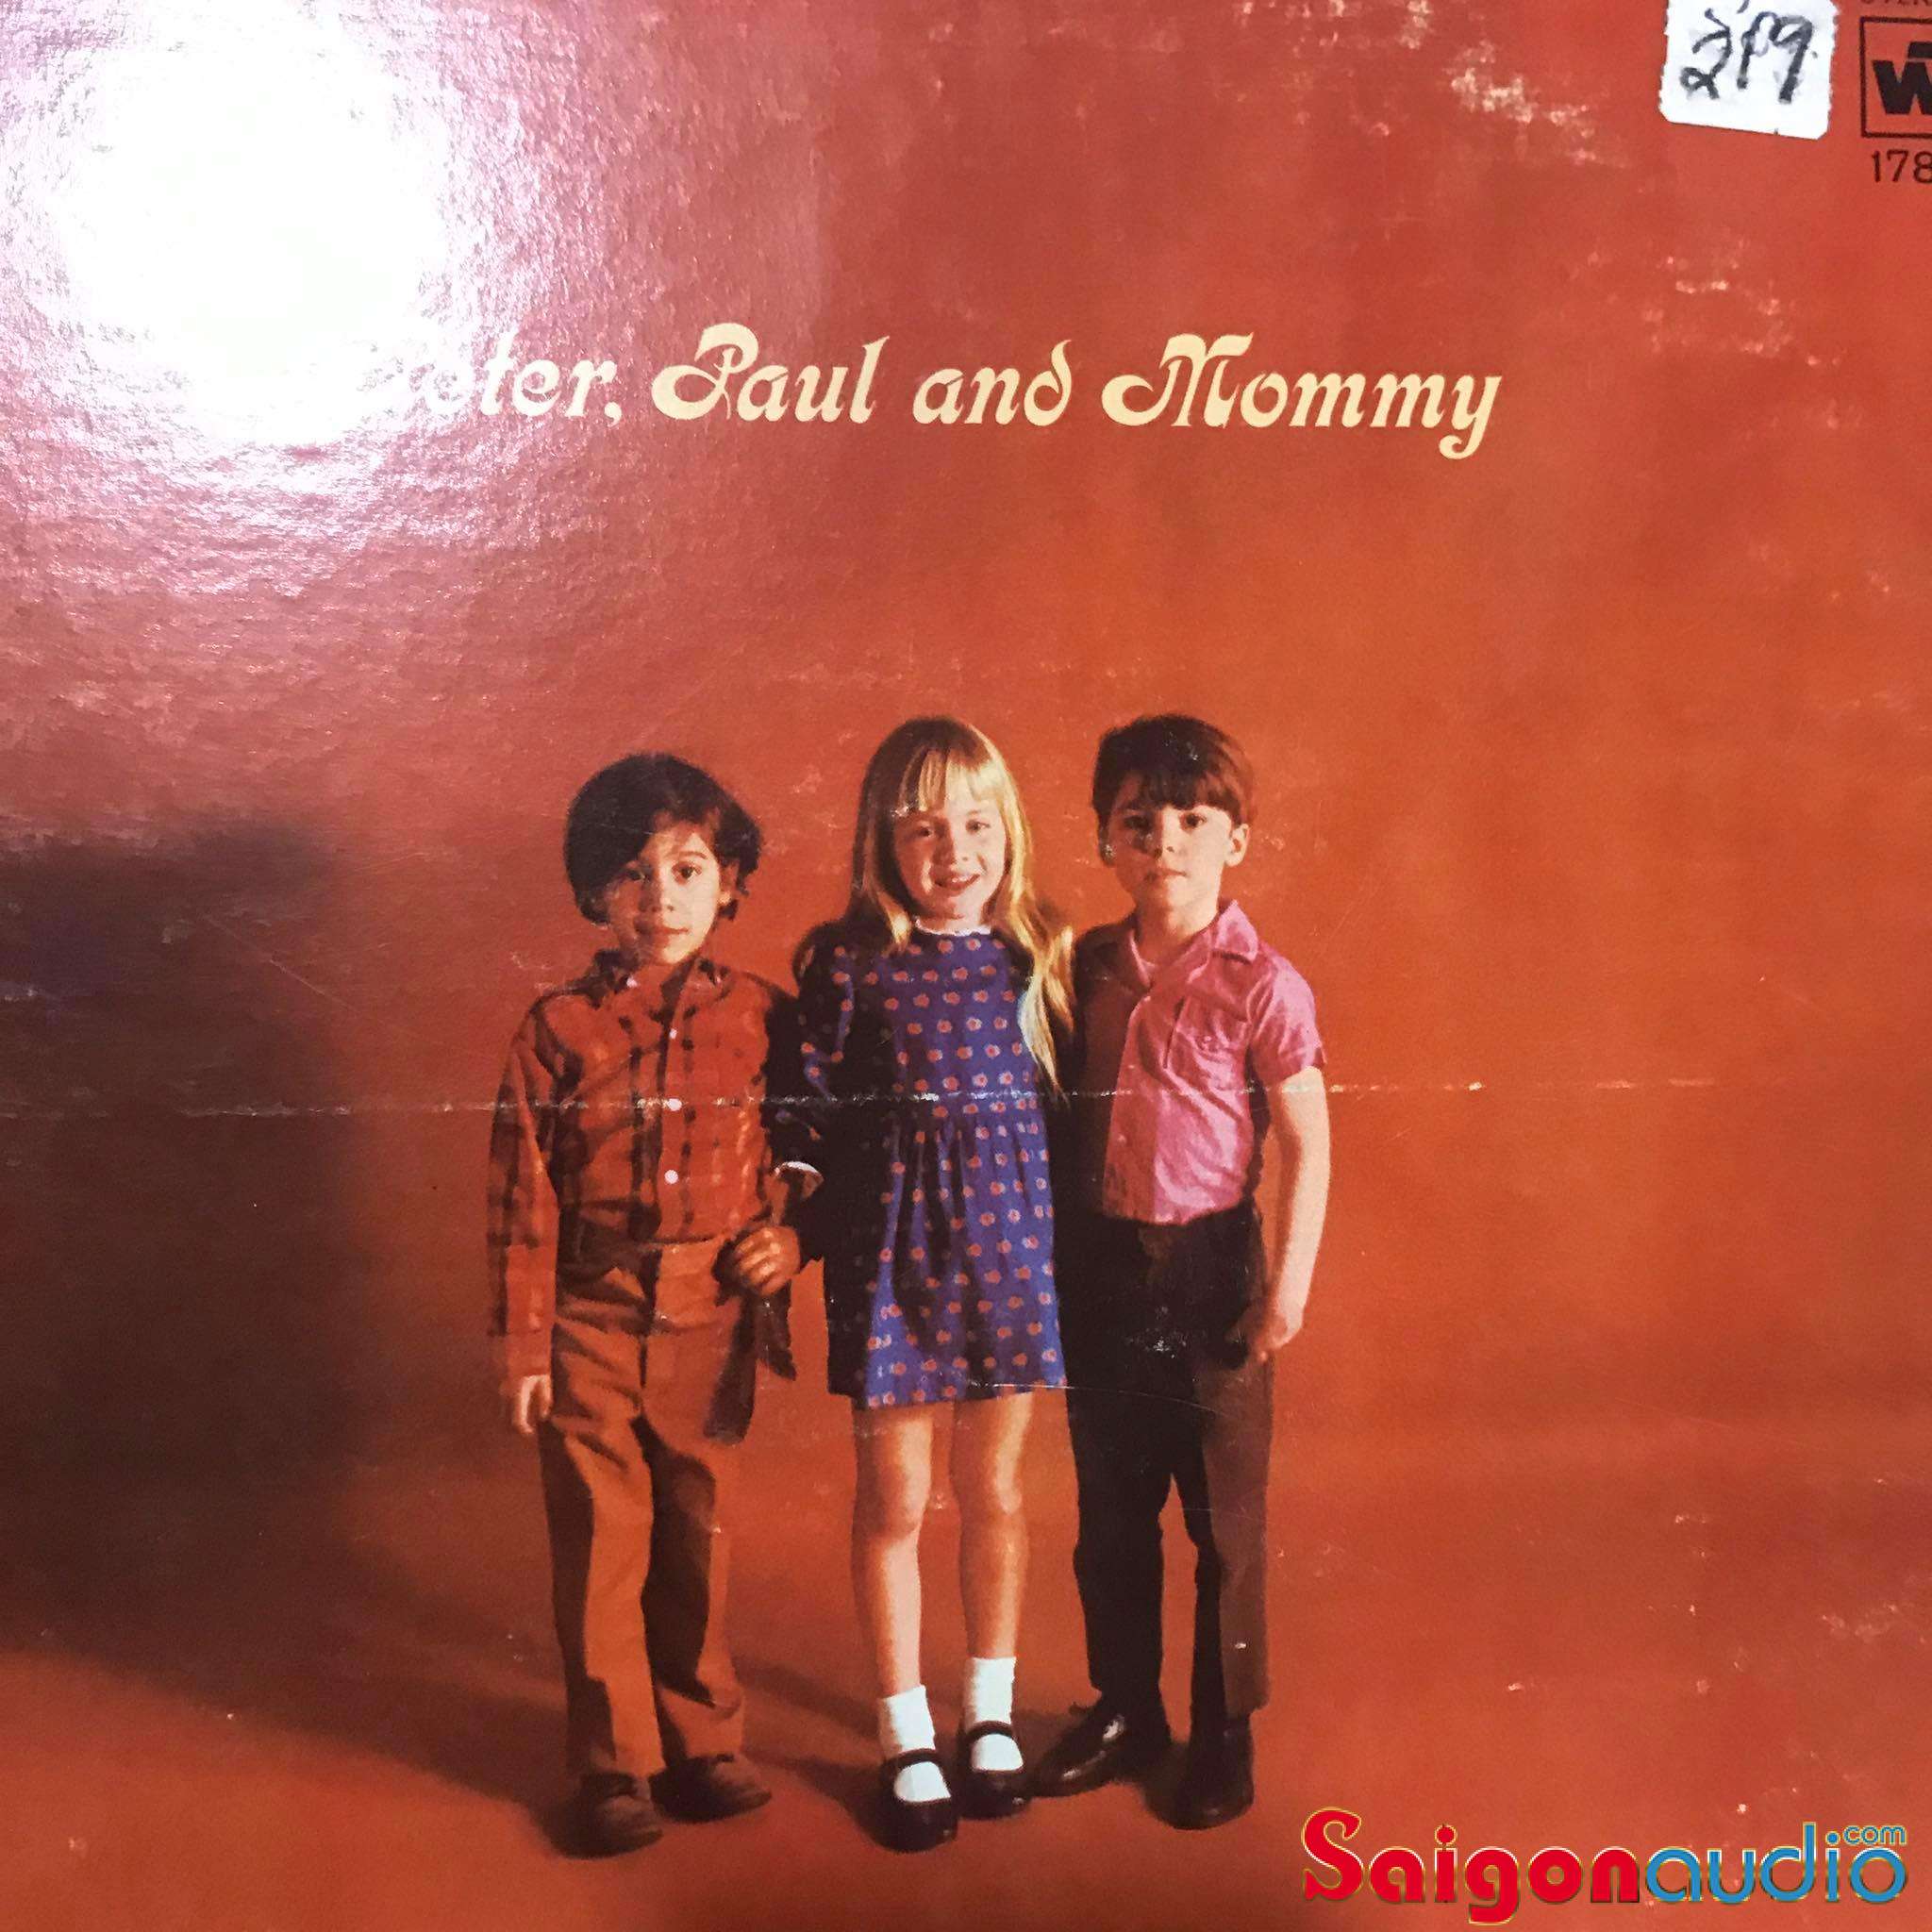 Đĩa than LP Peter, Paul And Mary - Peter, Paul And Mommy (1969)